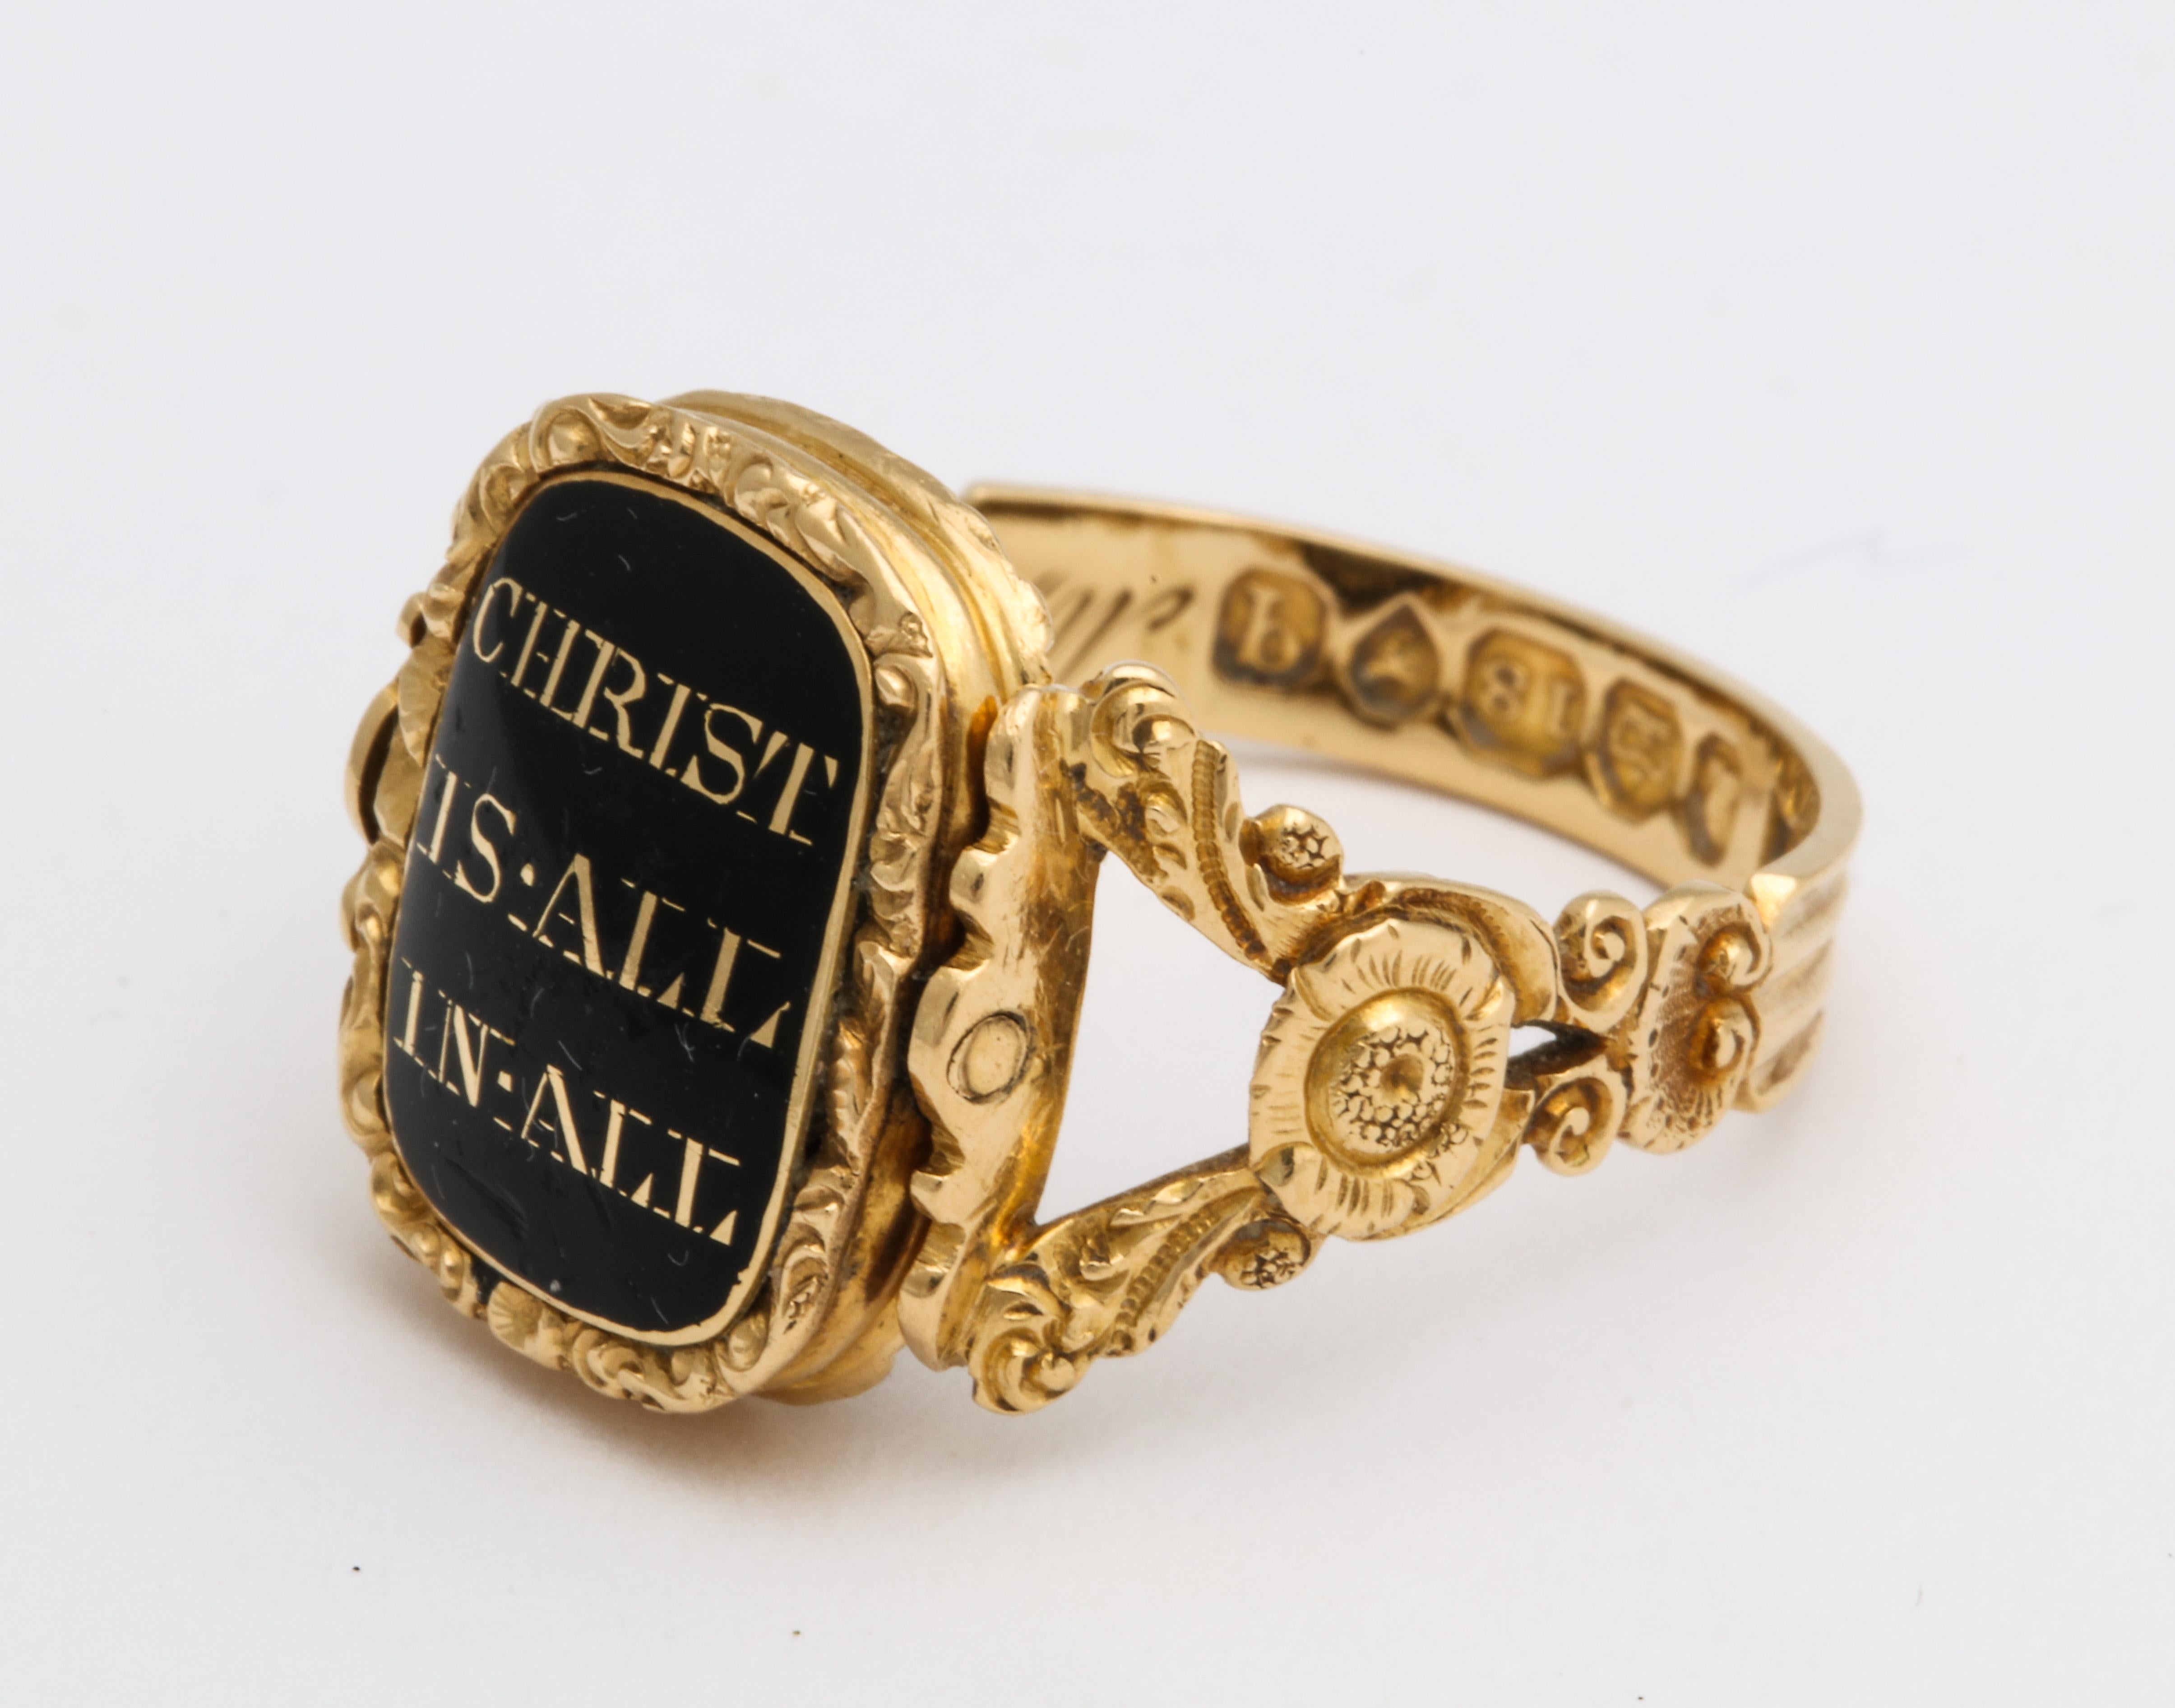 Rare antique Georgian Memorial Swivel Ring Glorifying Christ London 1831 made within a year of the deceased's death.  An exquisite 19th century 18 kt double ring, once belonged to a family, swivels to show the message 